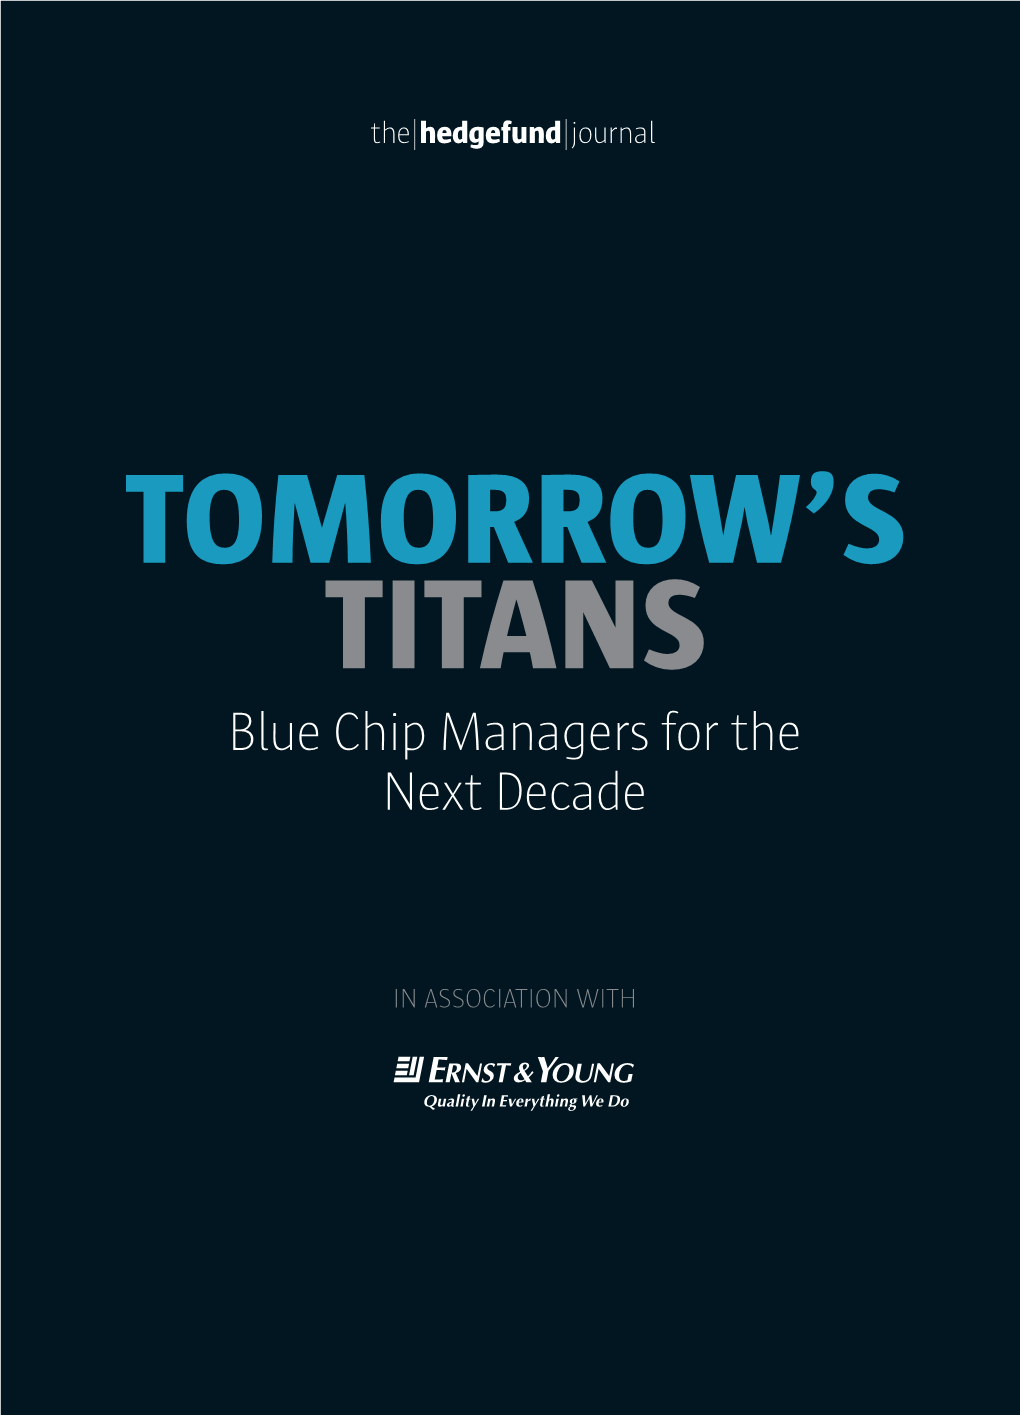 Blue Chip Managers for the Next Decade